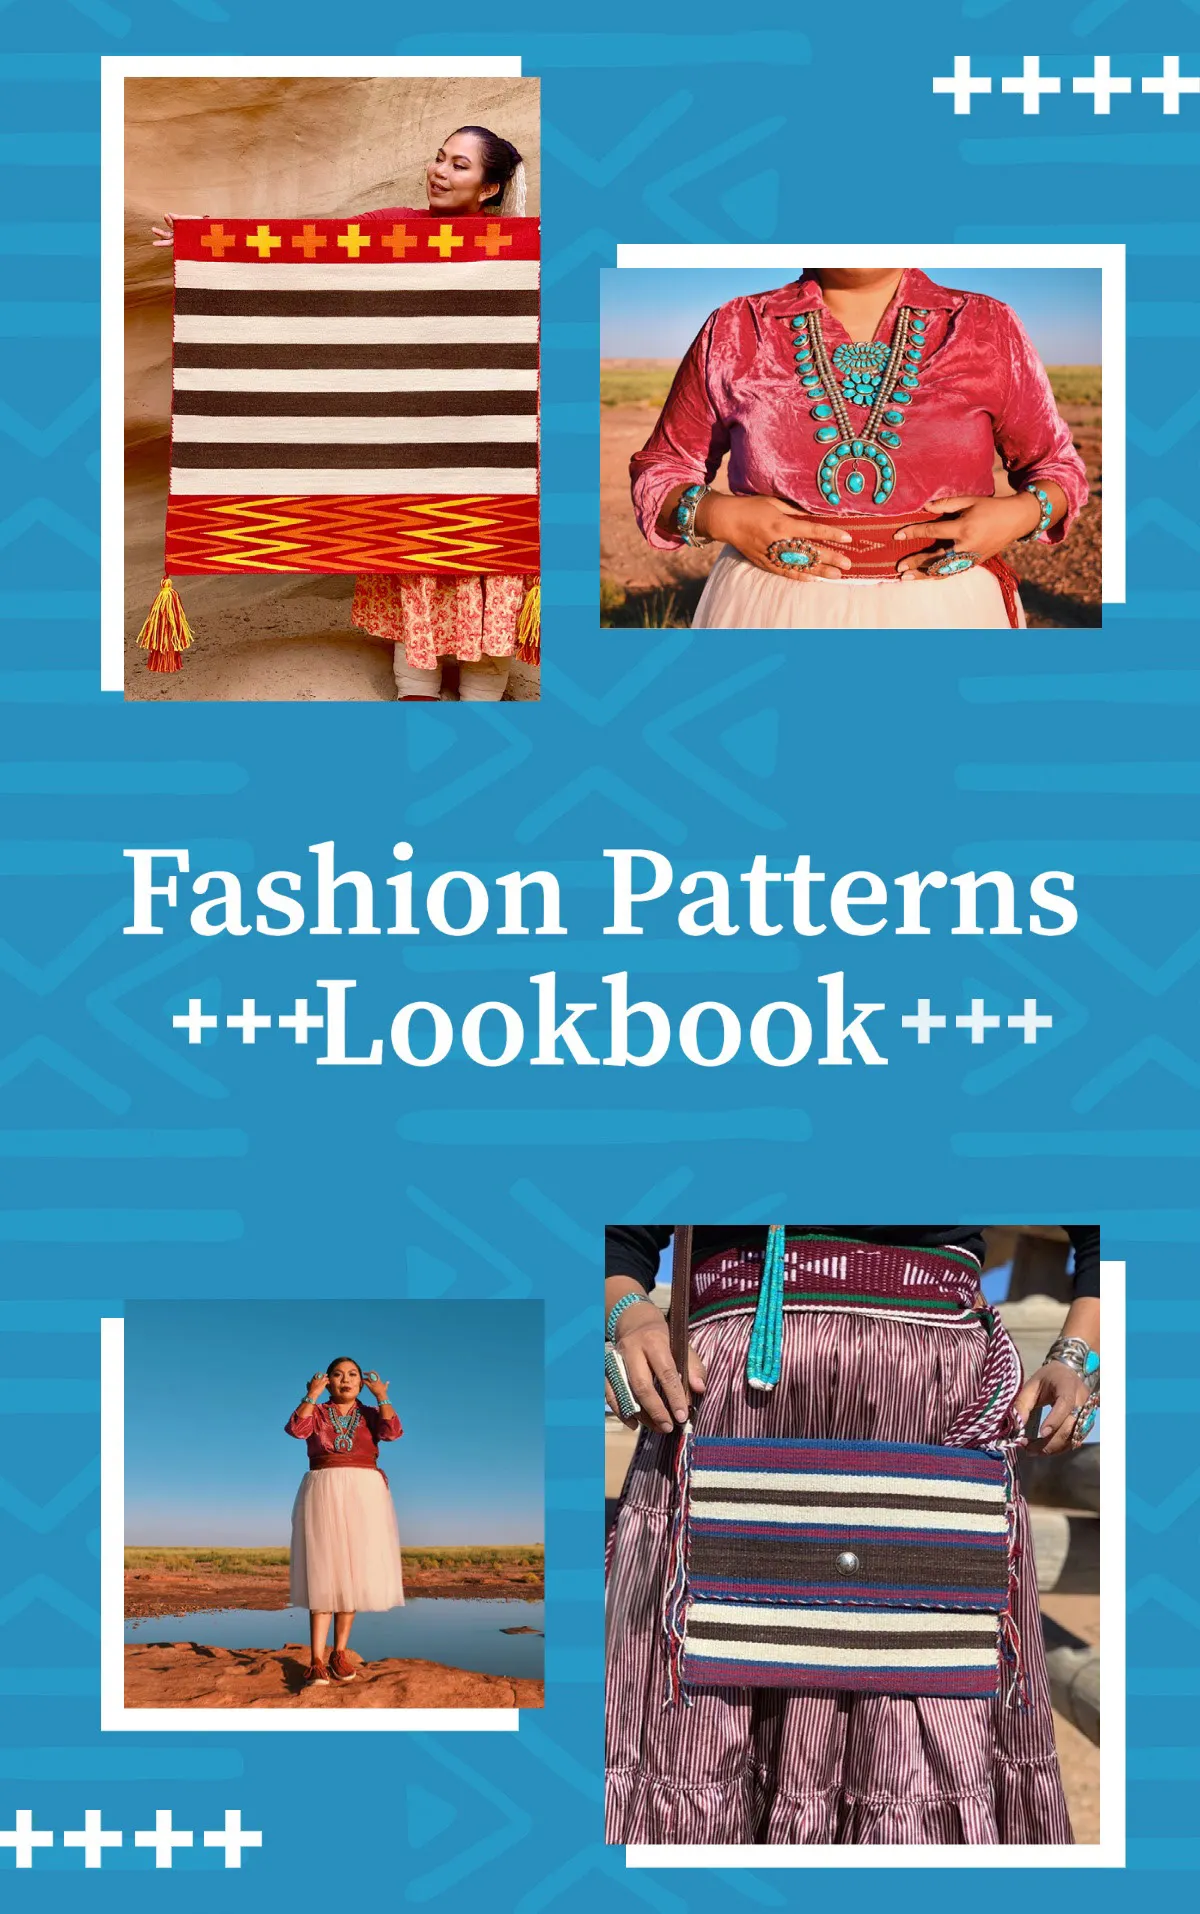 Blue and white fashion lookbook patterns Invitational Flyer by Naiomi Glasses